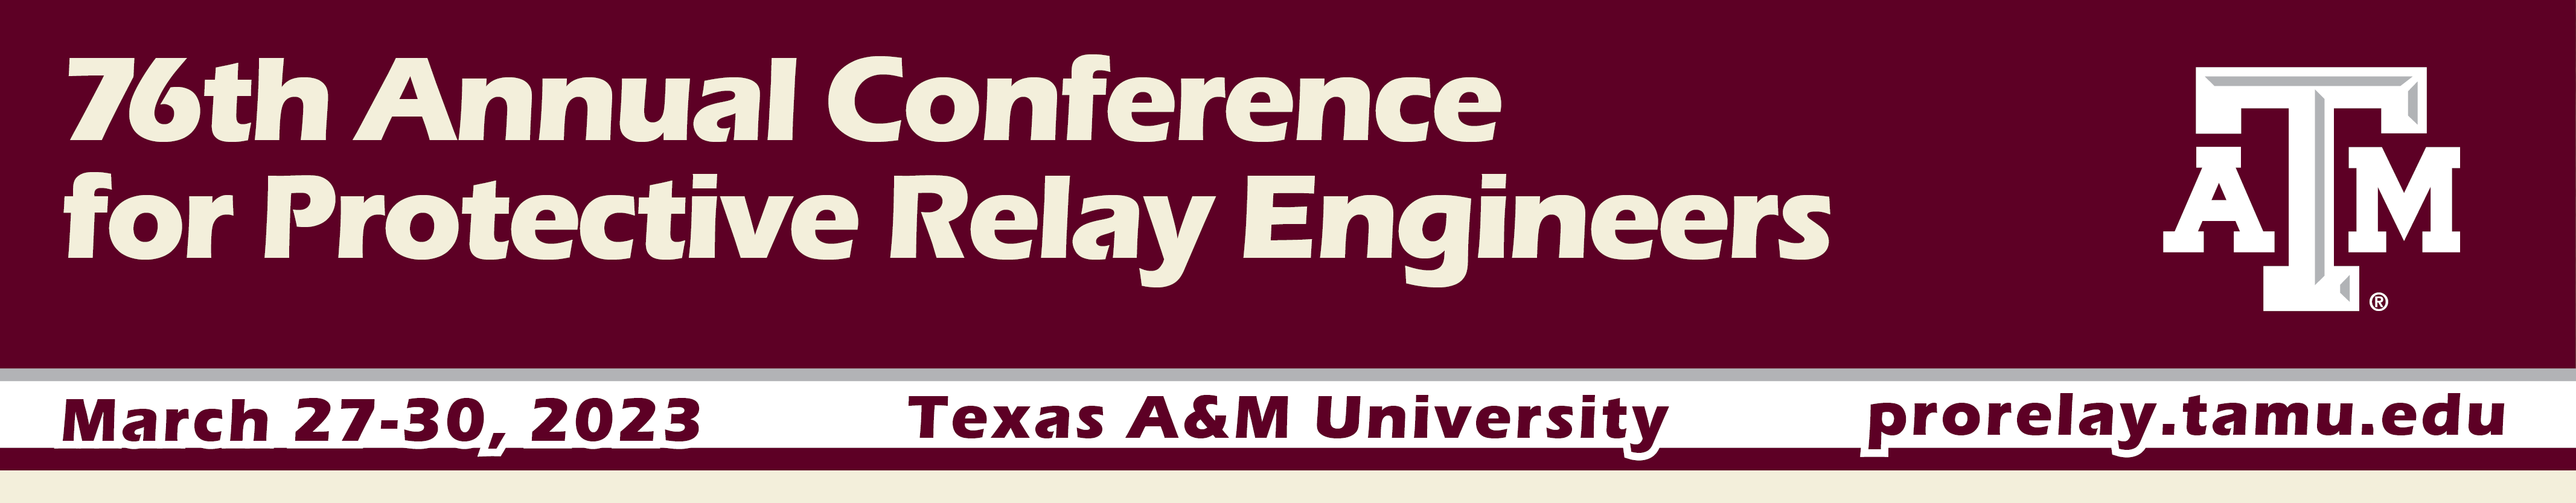 76th Annual Conference for Protective Relay Engineers